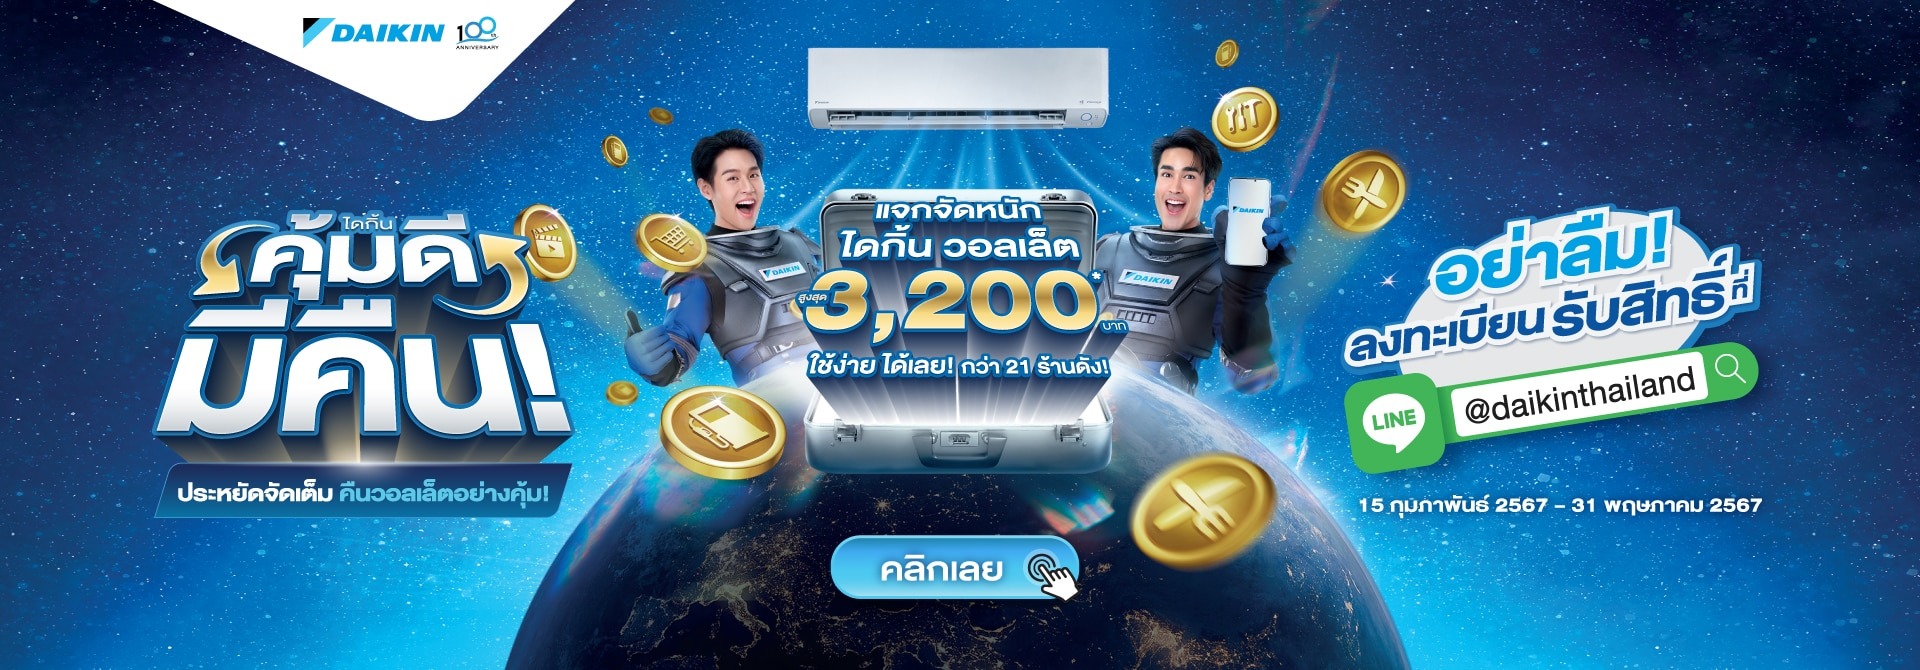 https://page.line.me/?accountId=daikinthailand